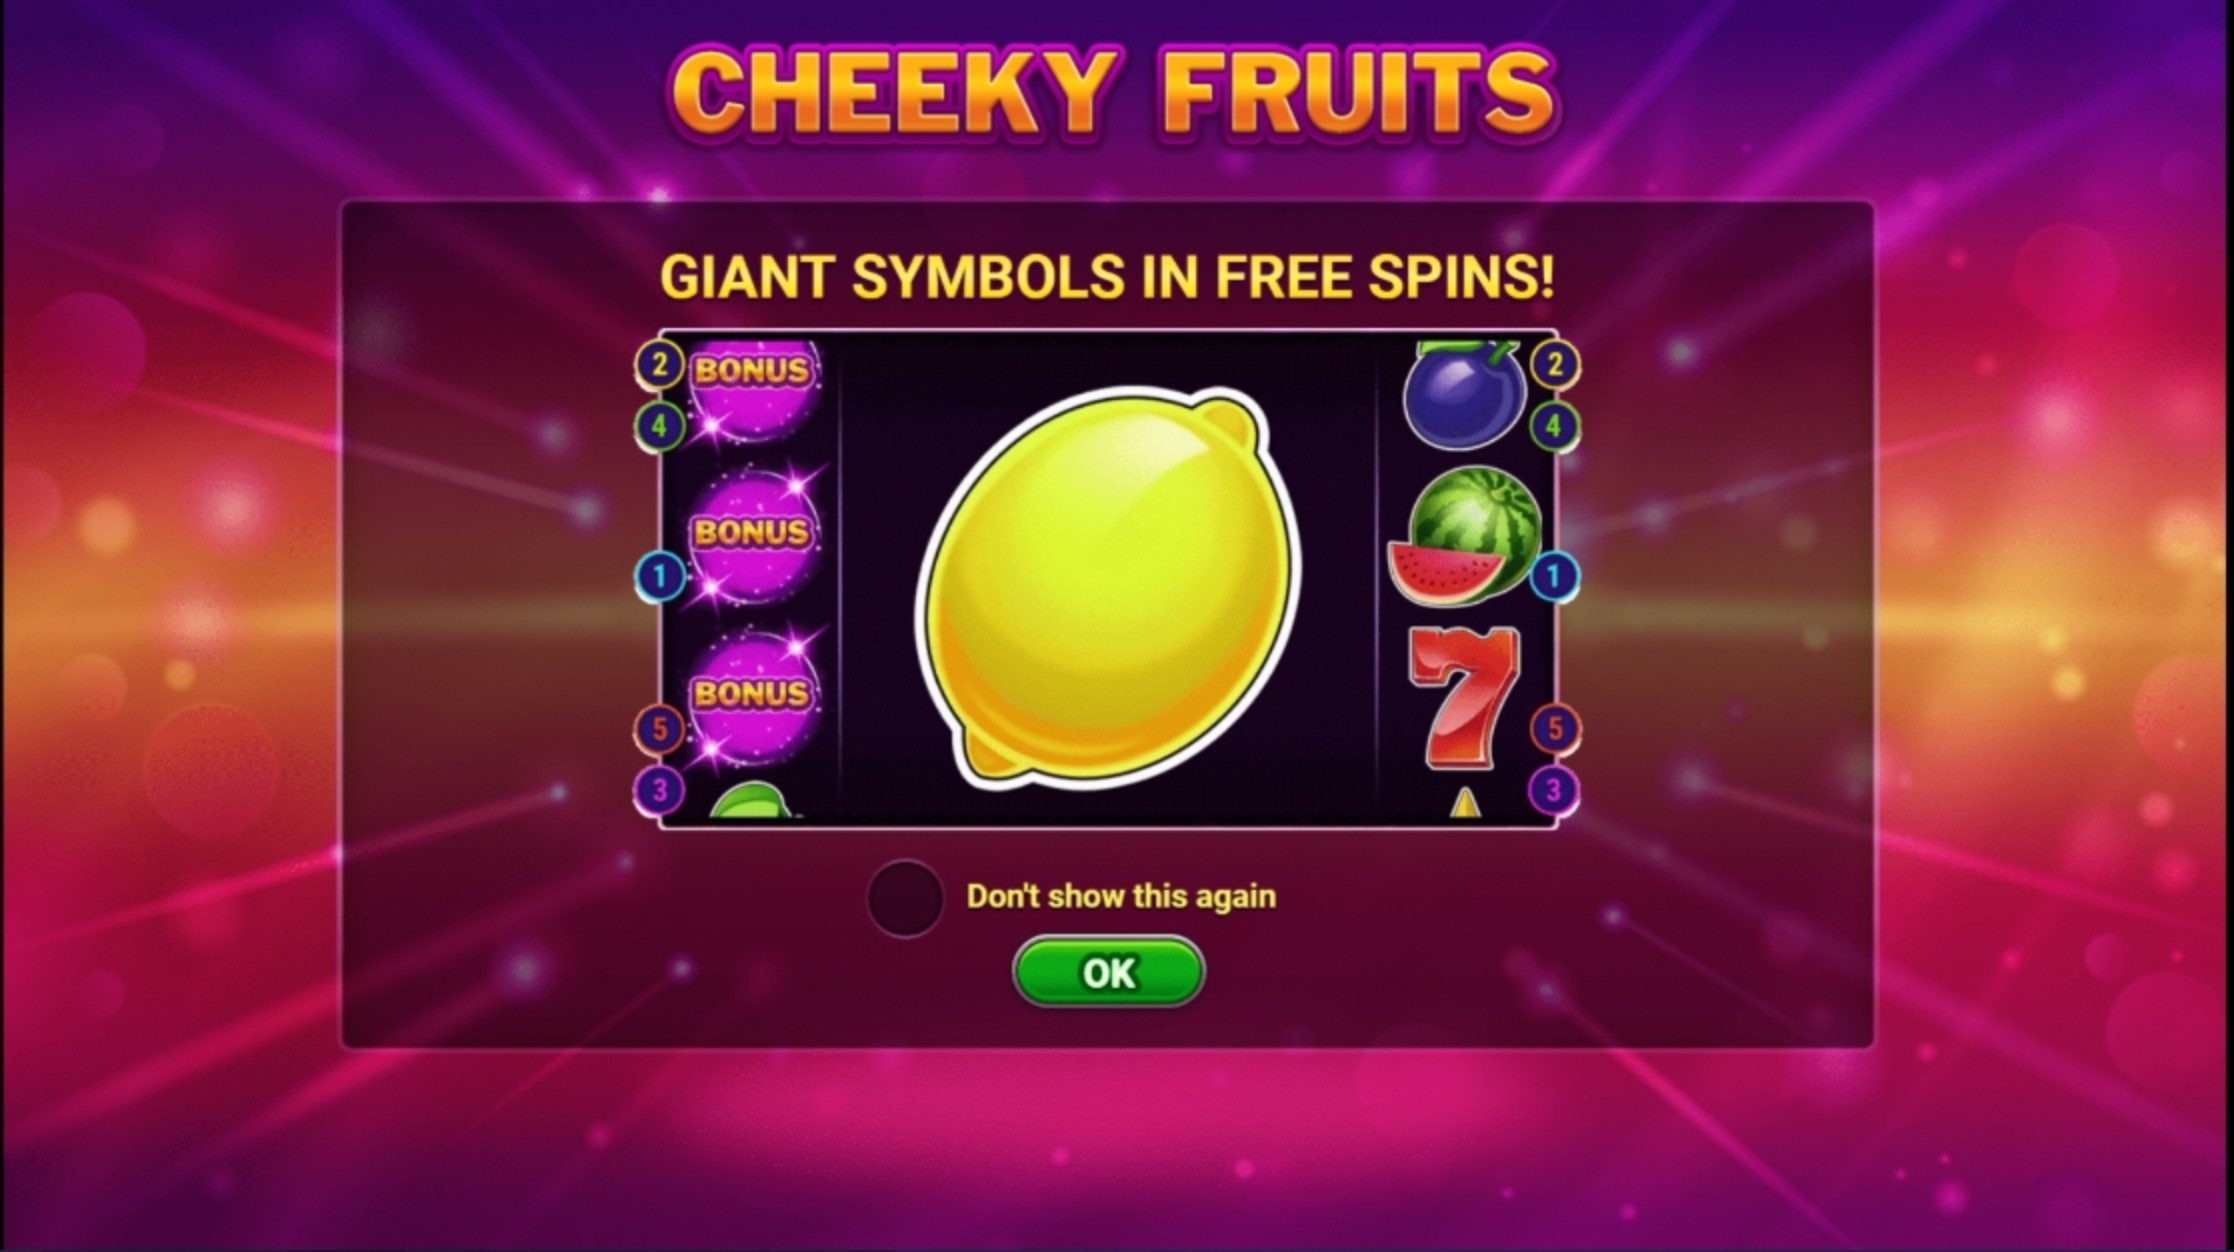 Play Cheeky Fruits Free Casino Slot Game by Gluck Games